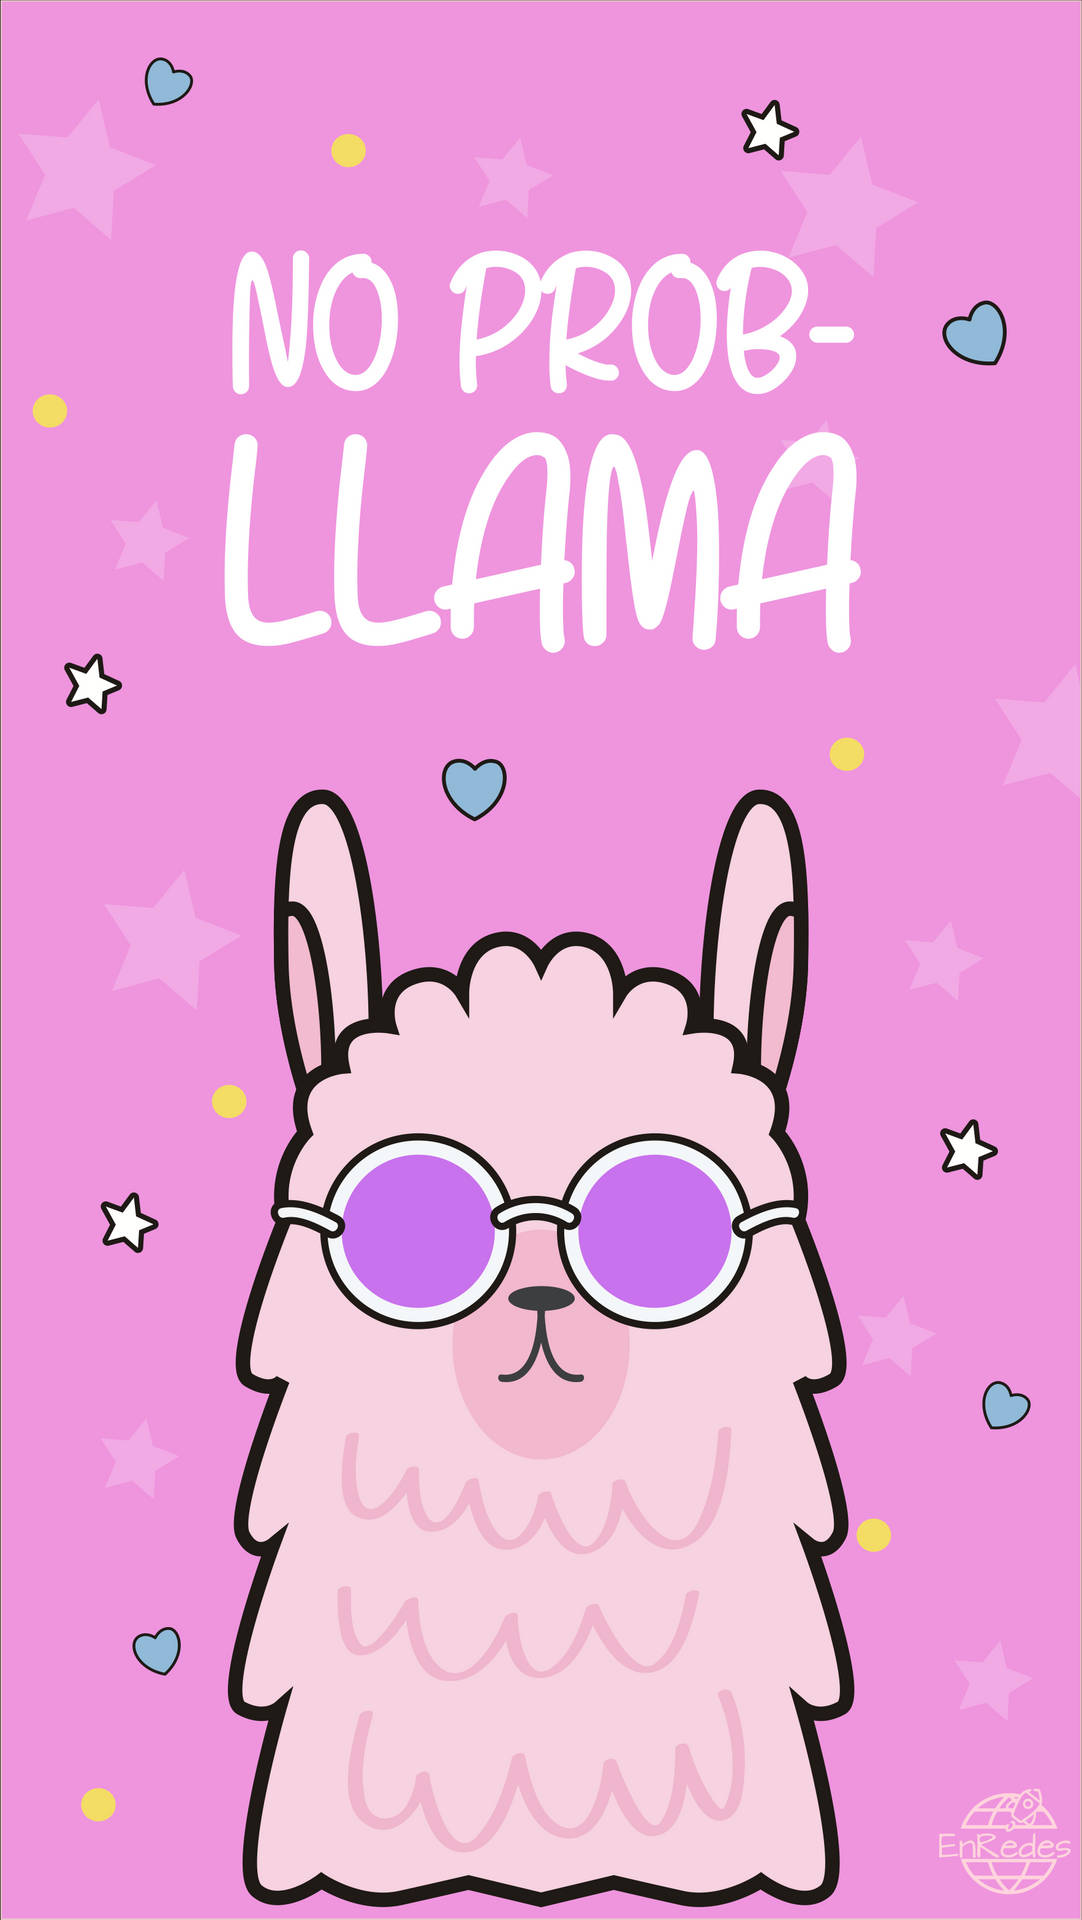 A cute Lama expressing a chilled attitude with 'No Prob-Llama' statement. Wallpaper